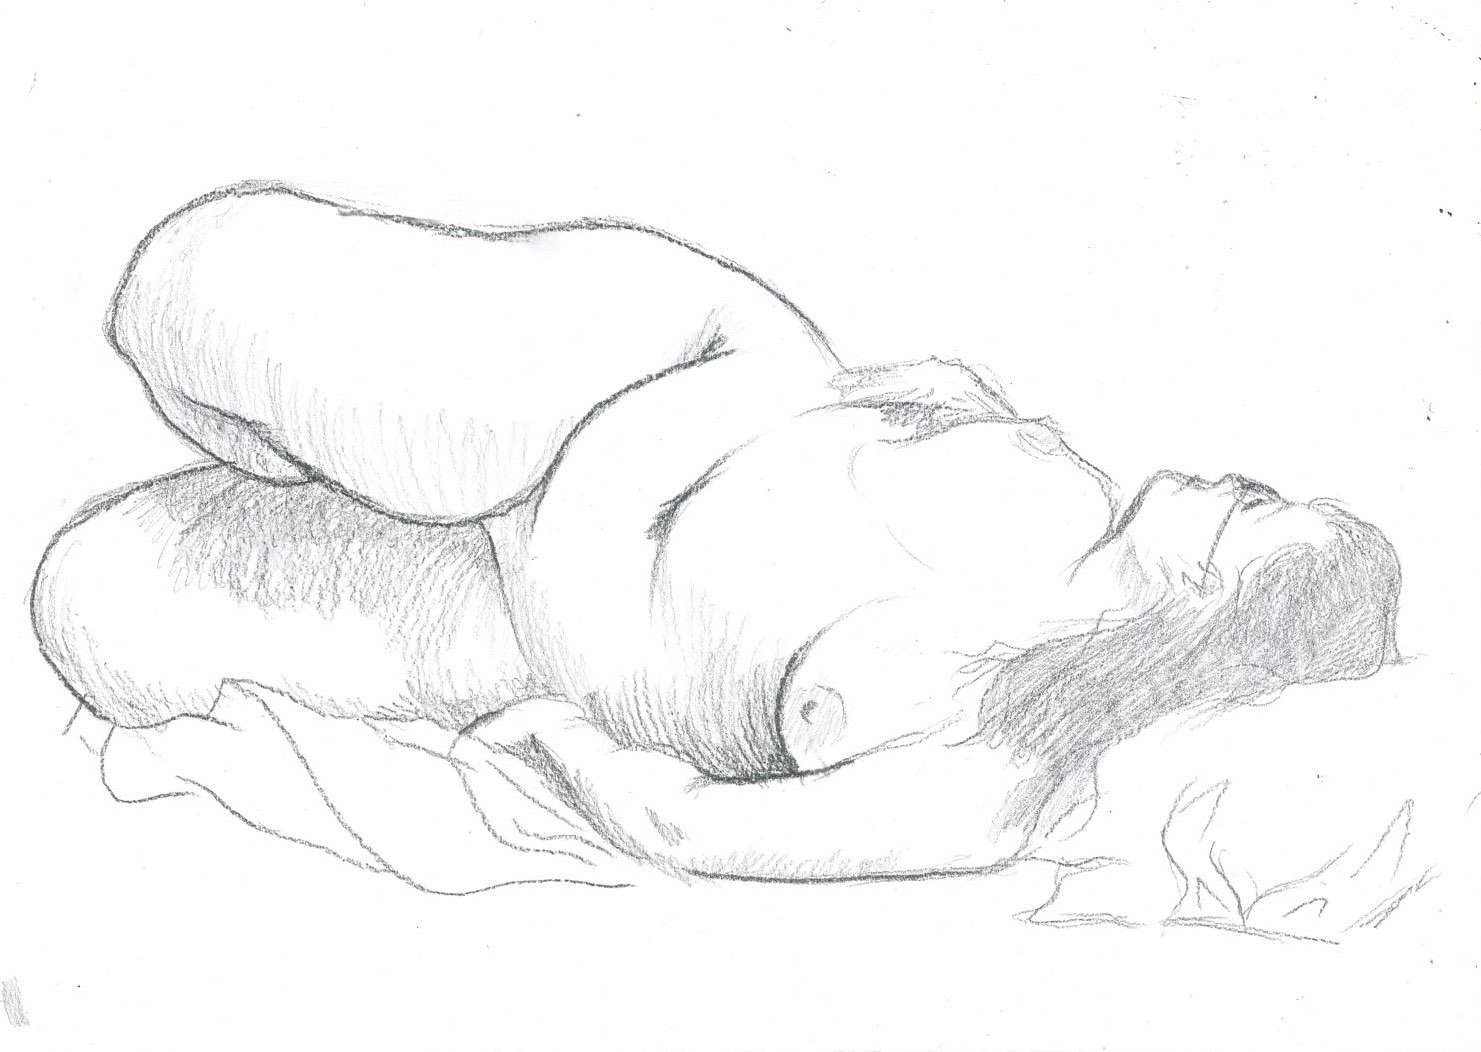 Life drawing in pencil of woman